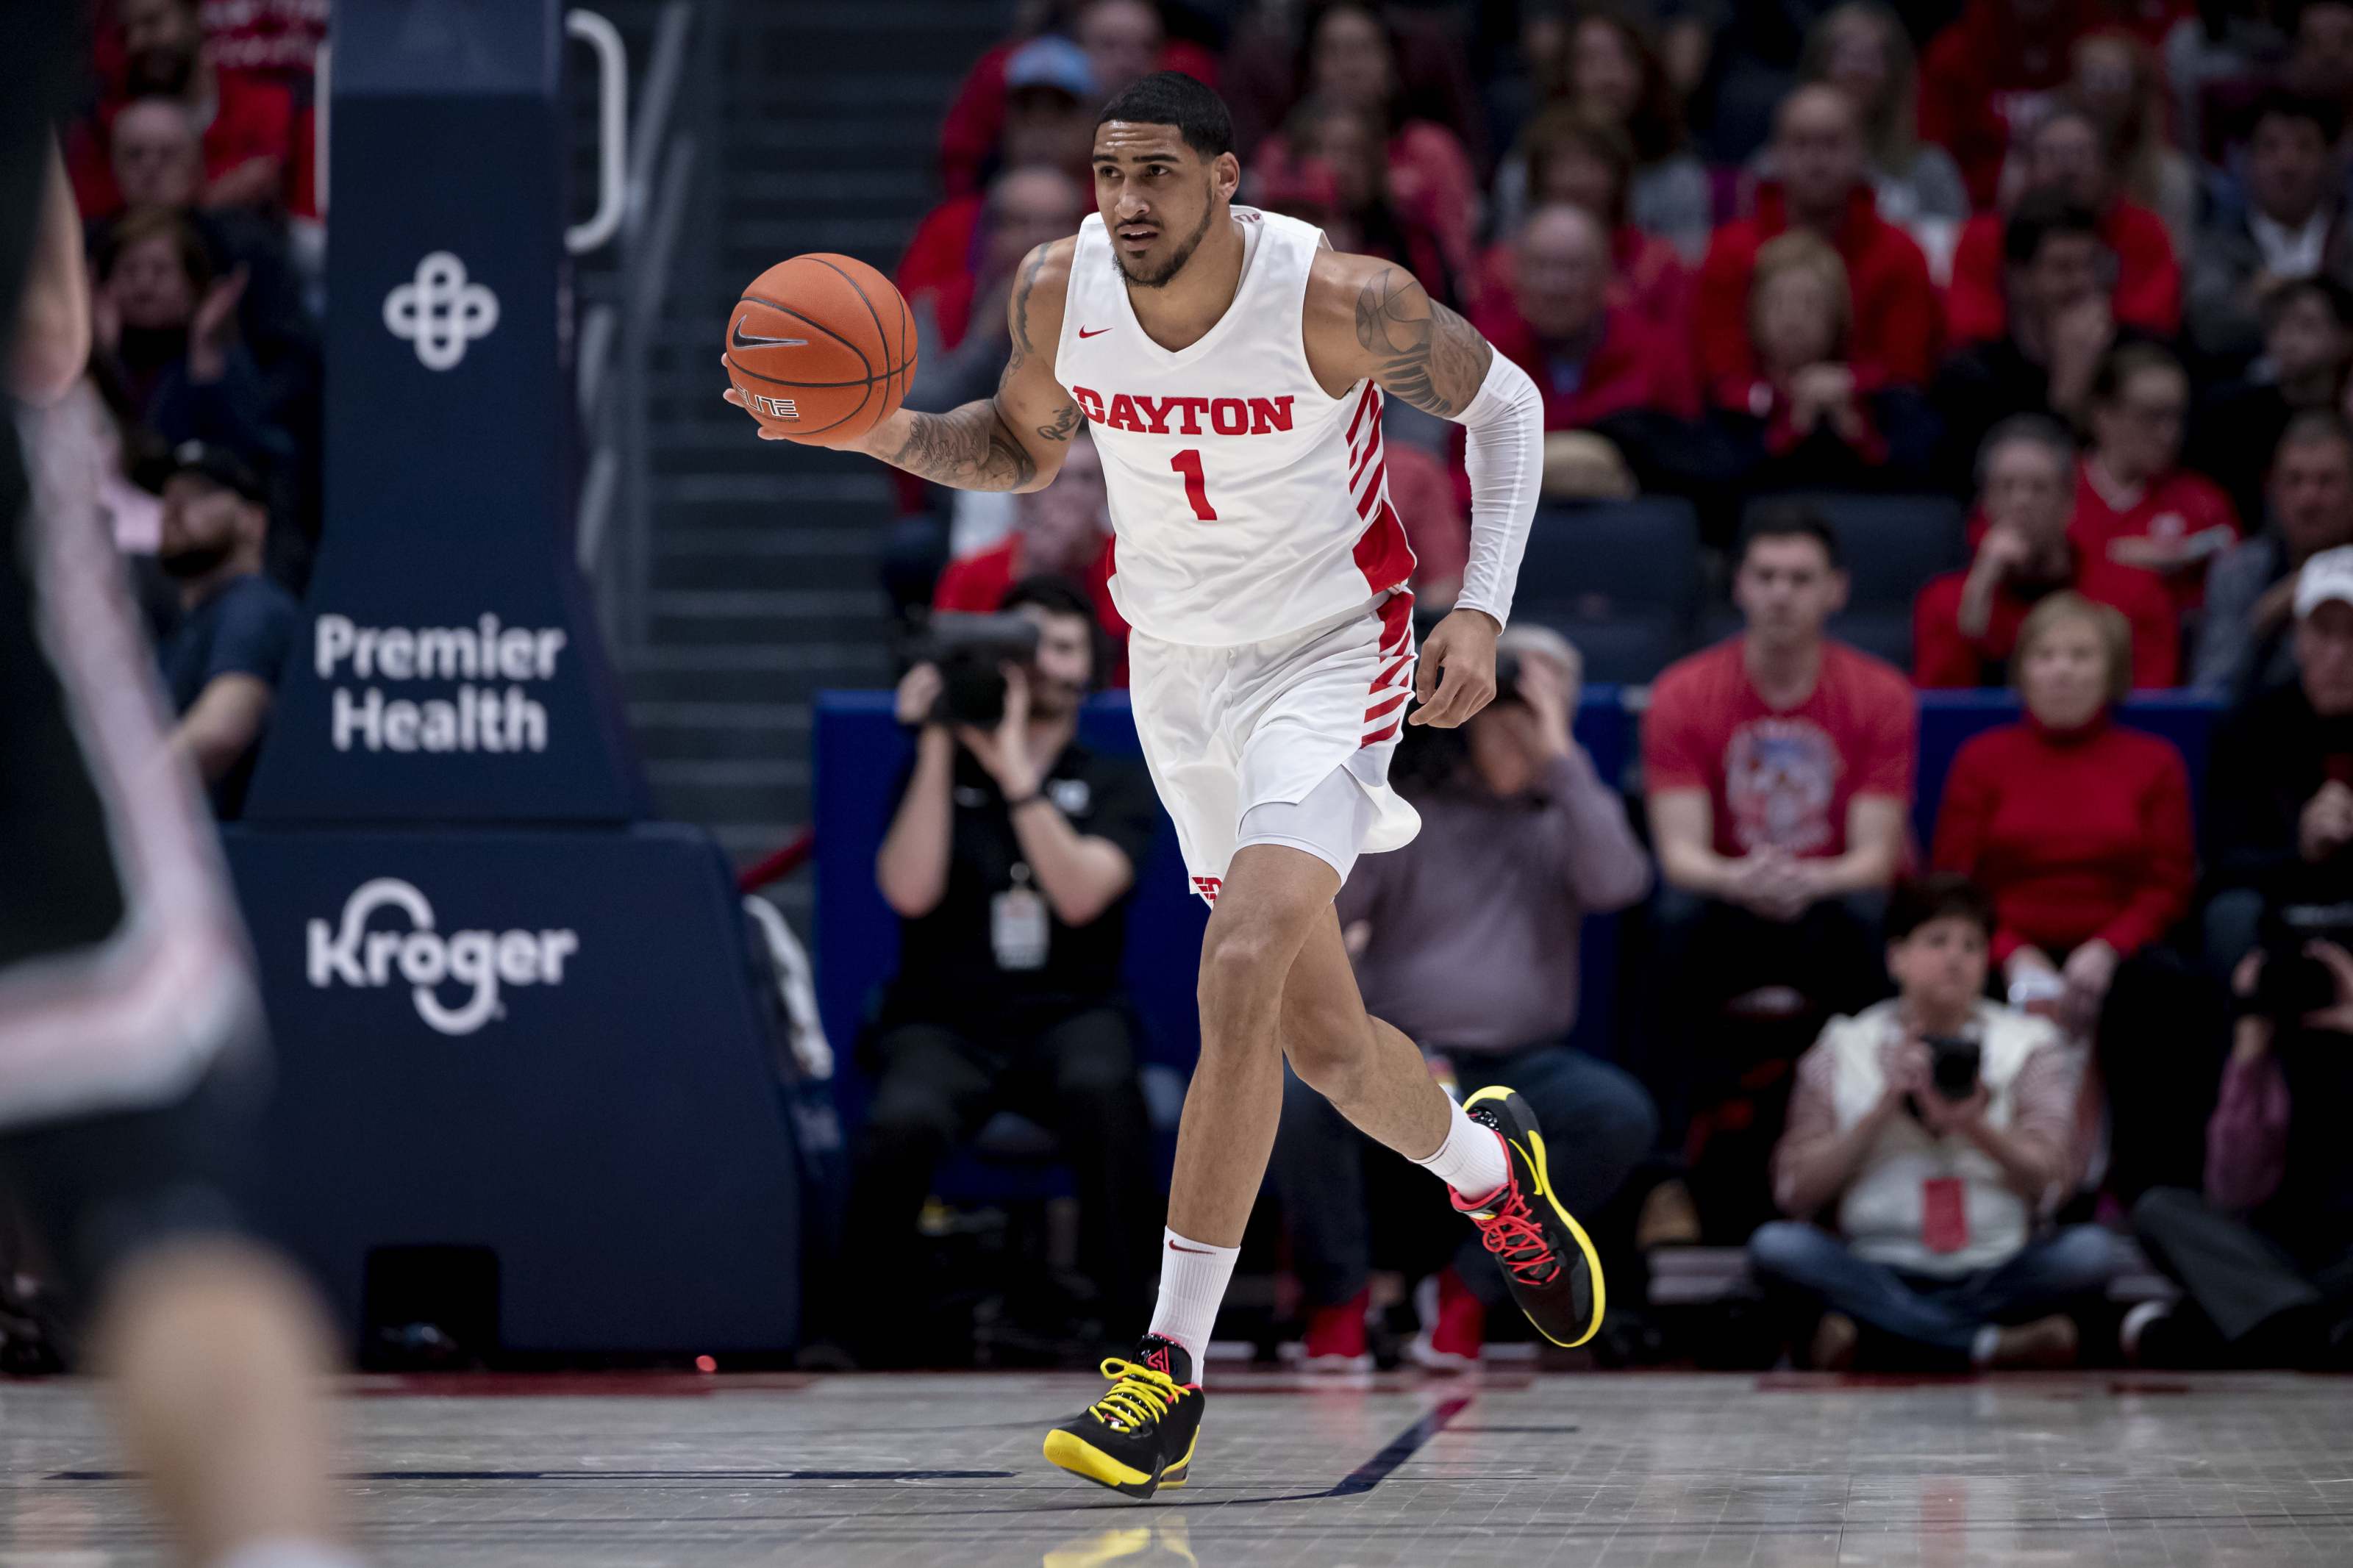 Dayton draft prospect Obi Toppin among options for Cleveland Cavaliers